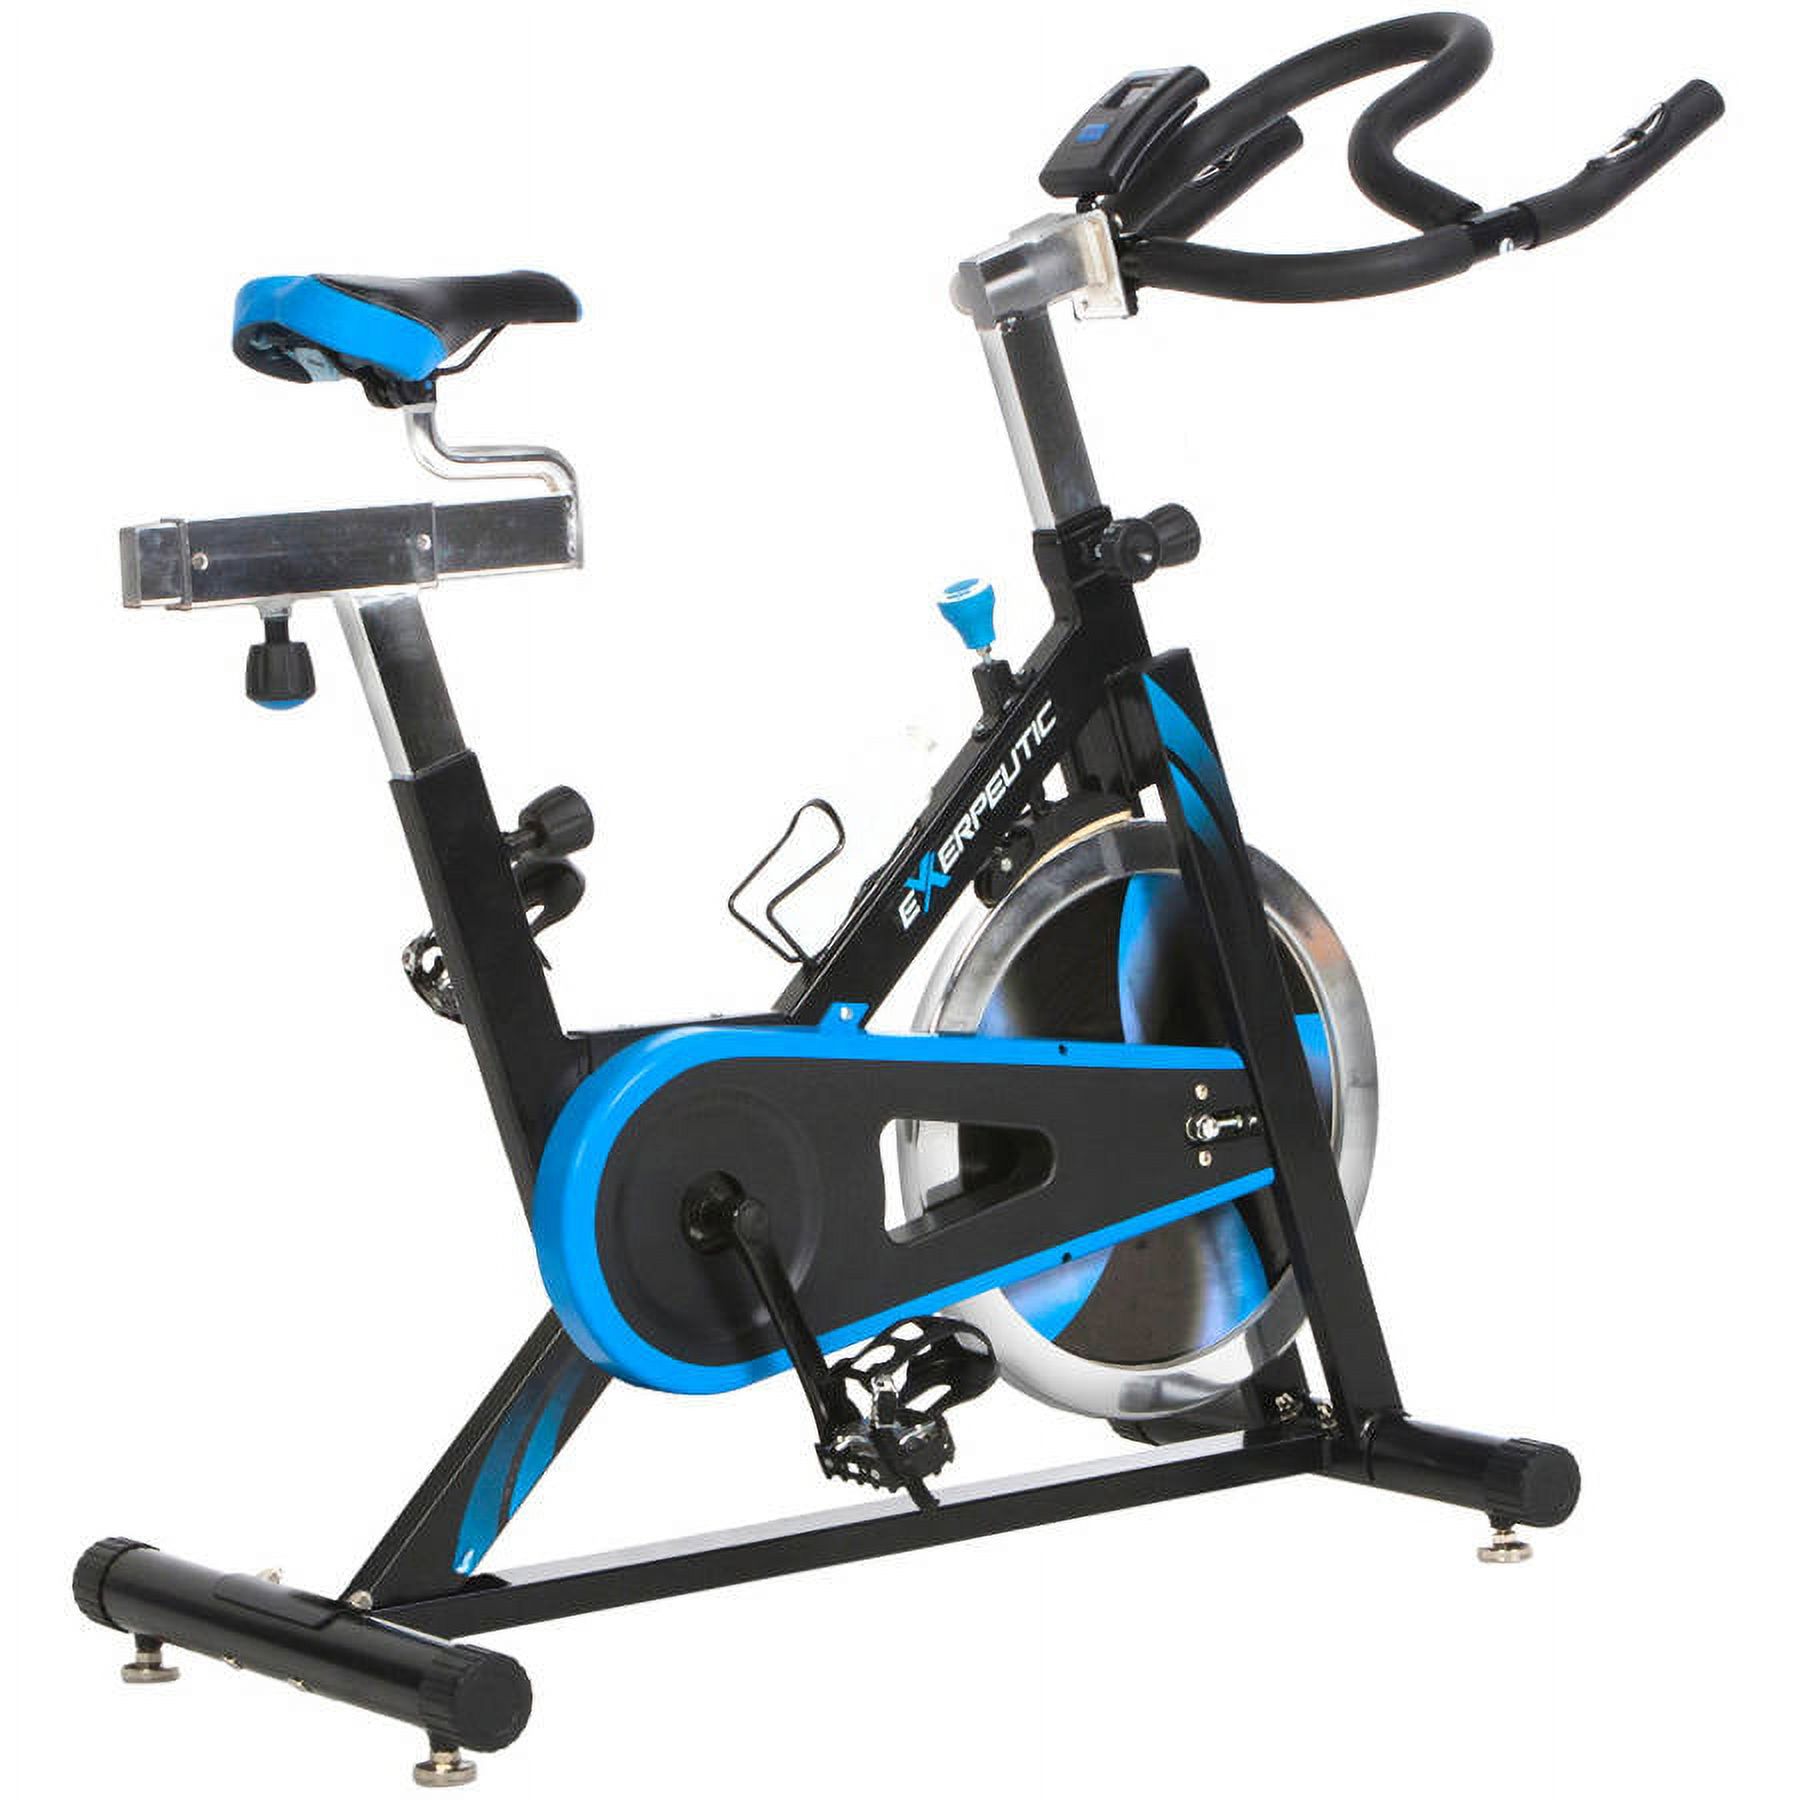 Exerpeutic LX7 Indoor Cycling Exercise Bike with Computer and Heart Pulse Sensors - image 1 of 16